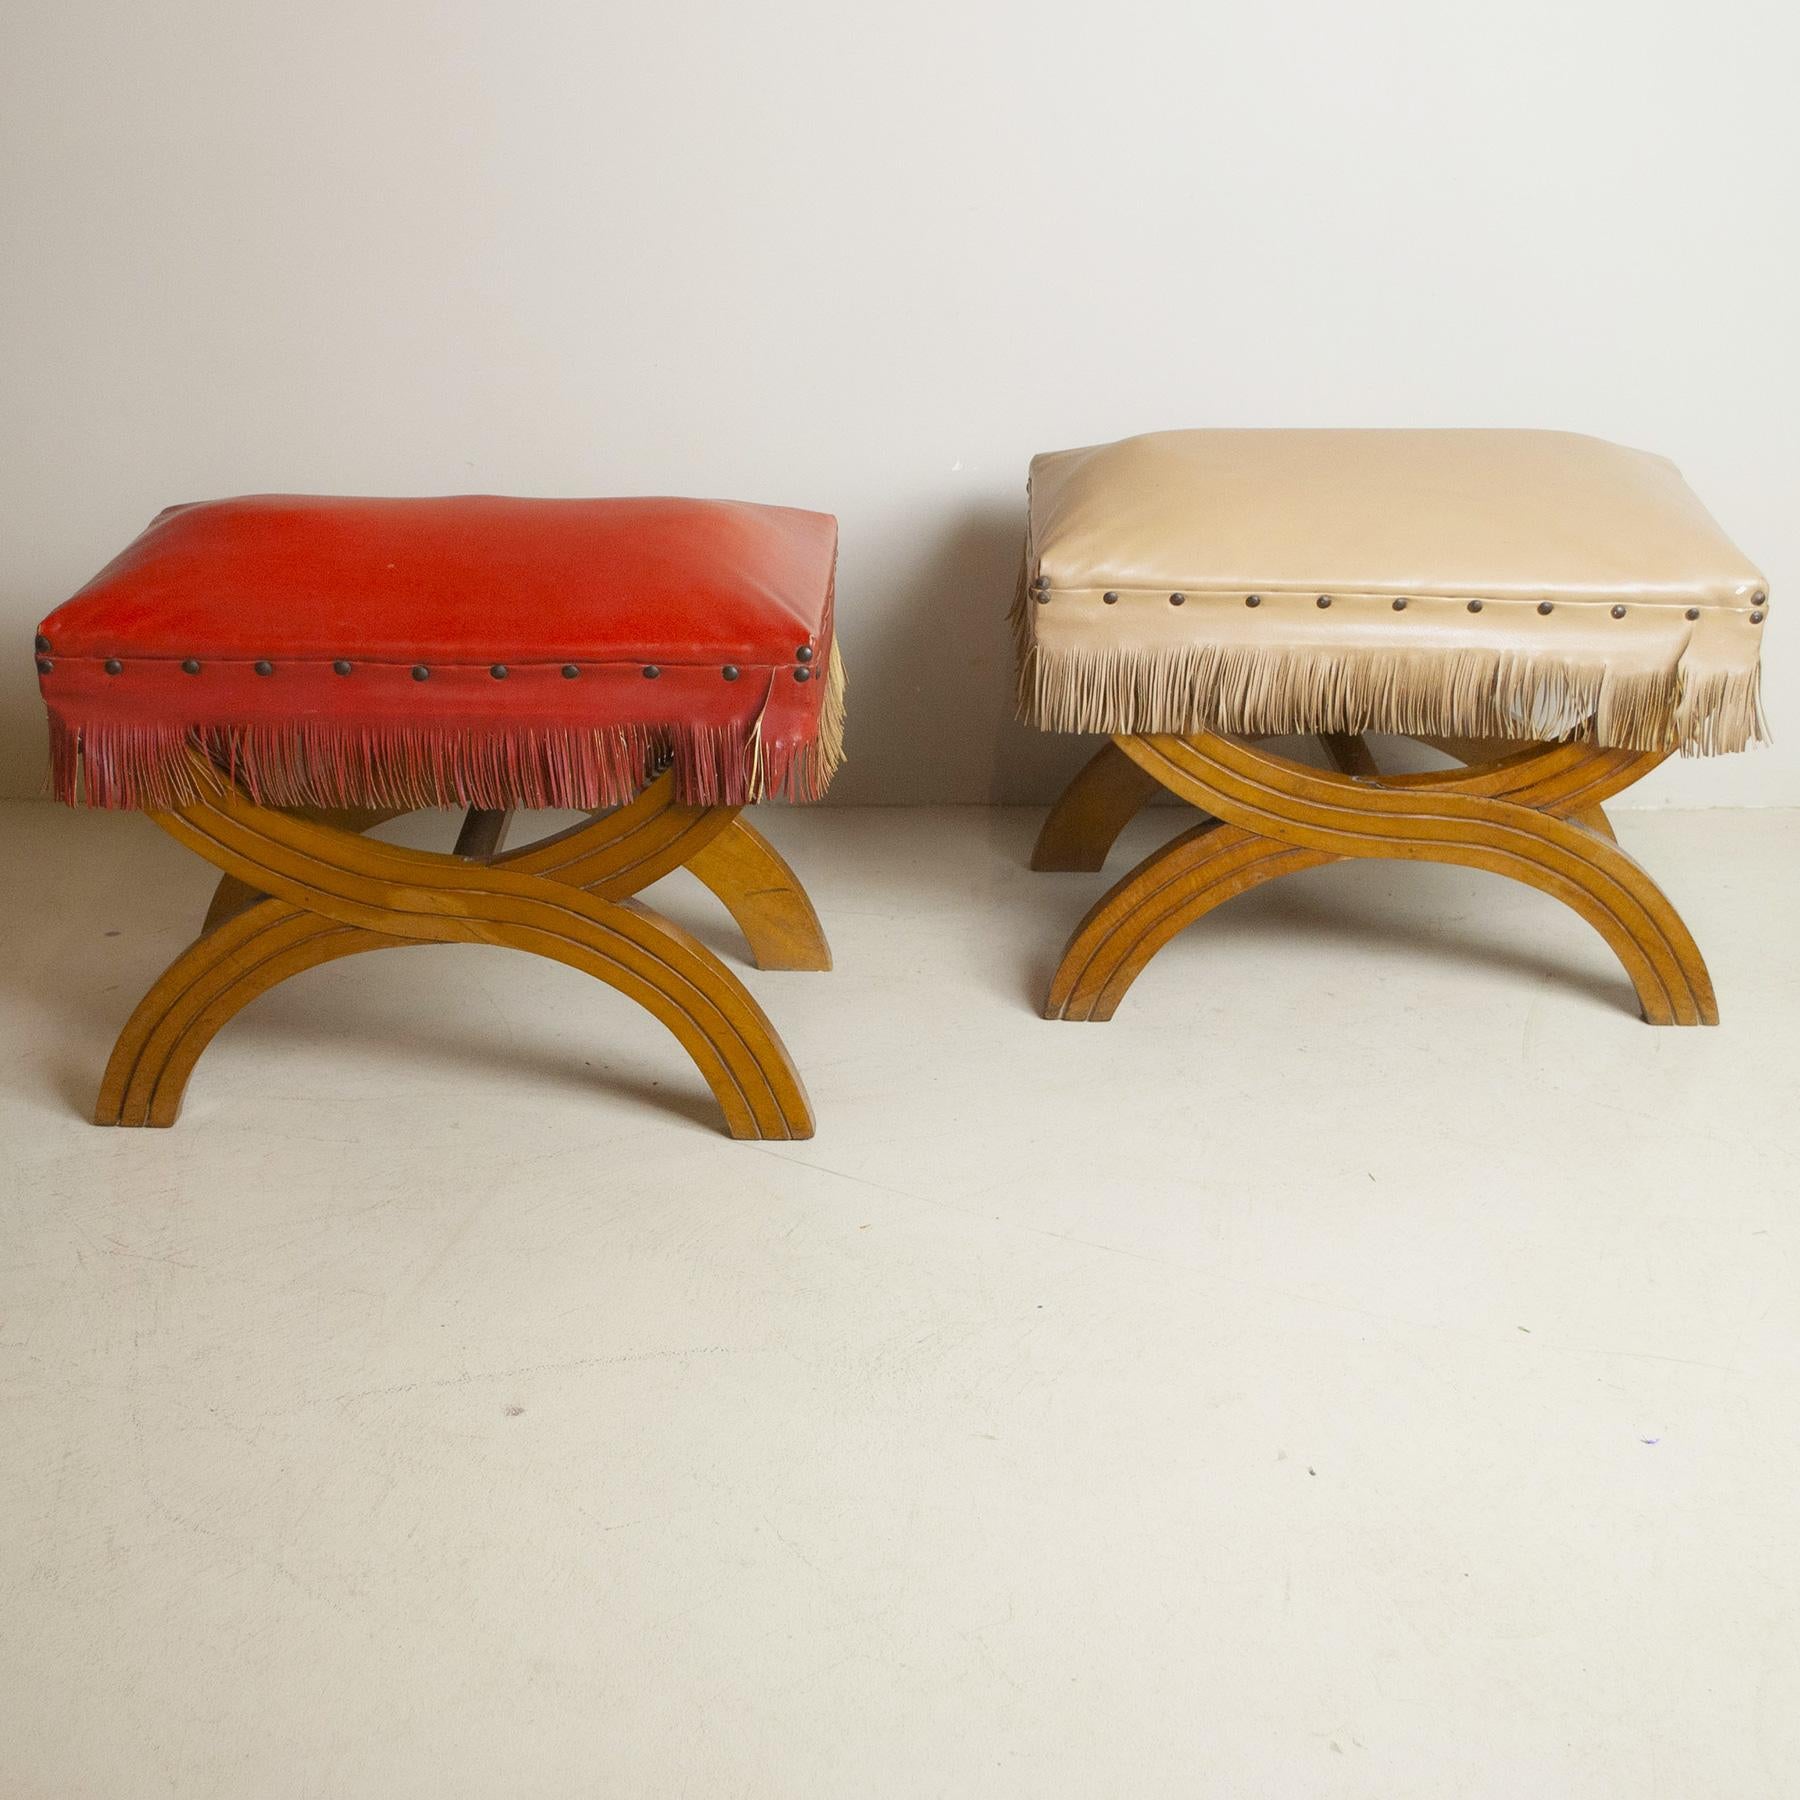 Gio Ponti in the Style Pair of Wooden Stools from the 1960s For Sale 2